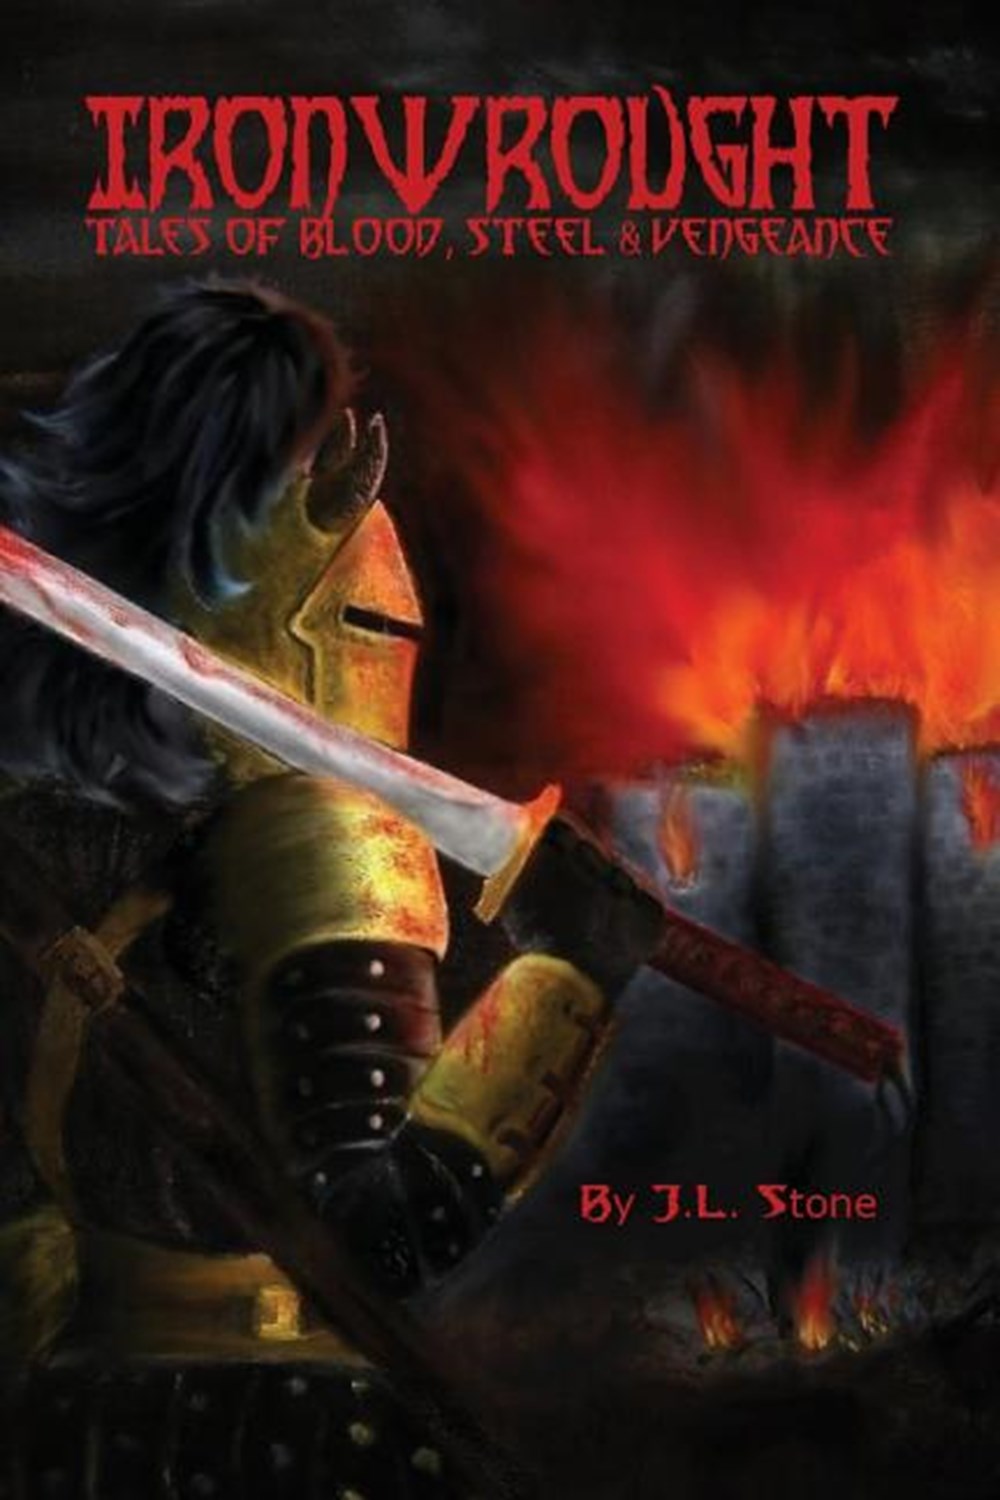 Ironwrought Tales Of Blood, Steel And Vengeance